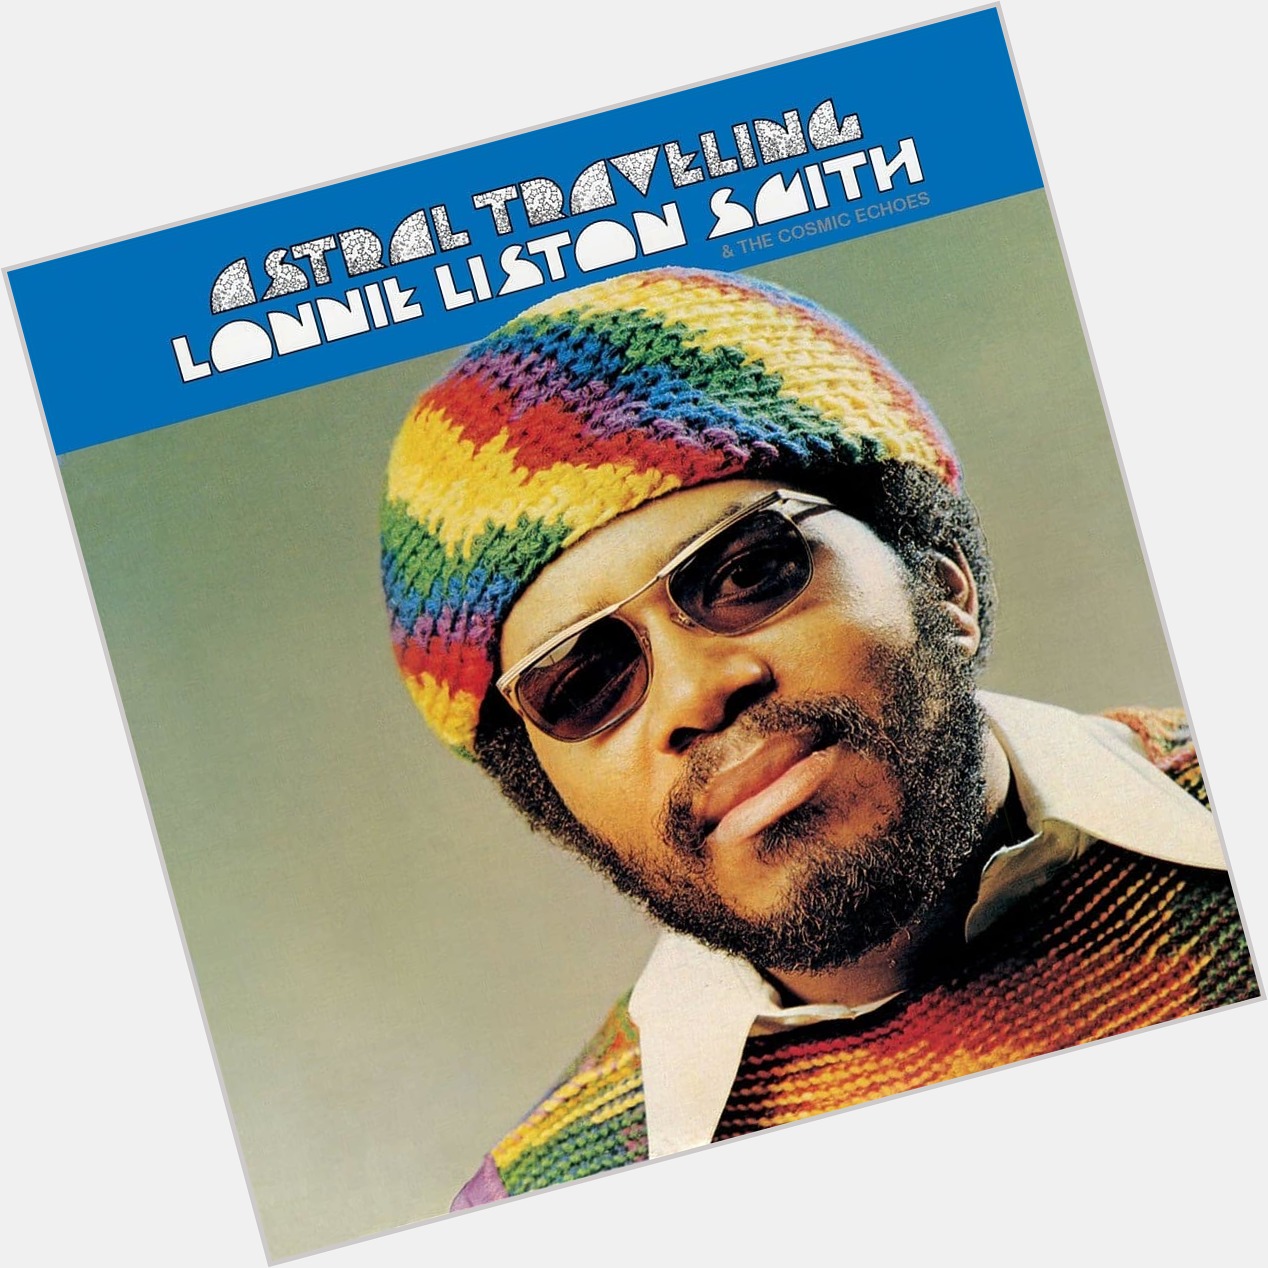 Happy 80th birthday to Lonnie Liston Smith. God bless him and his knitted headwear. 